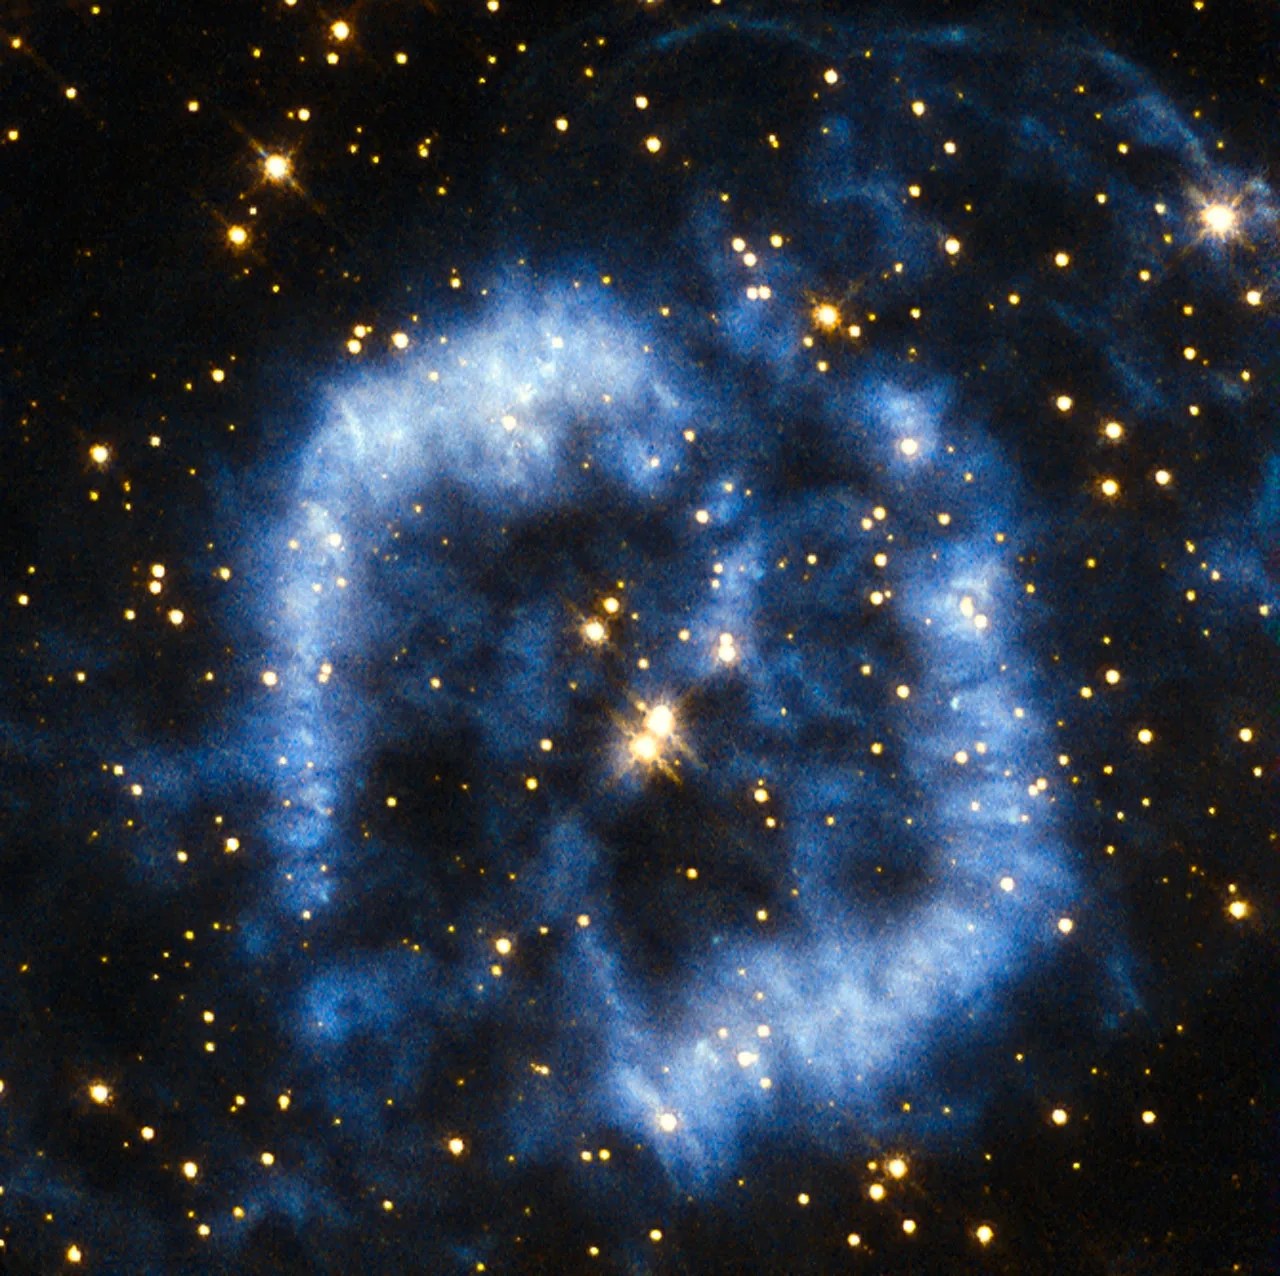 A winding blue cloud forming two lobes around two stars at the center.